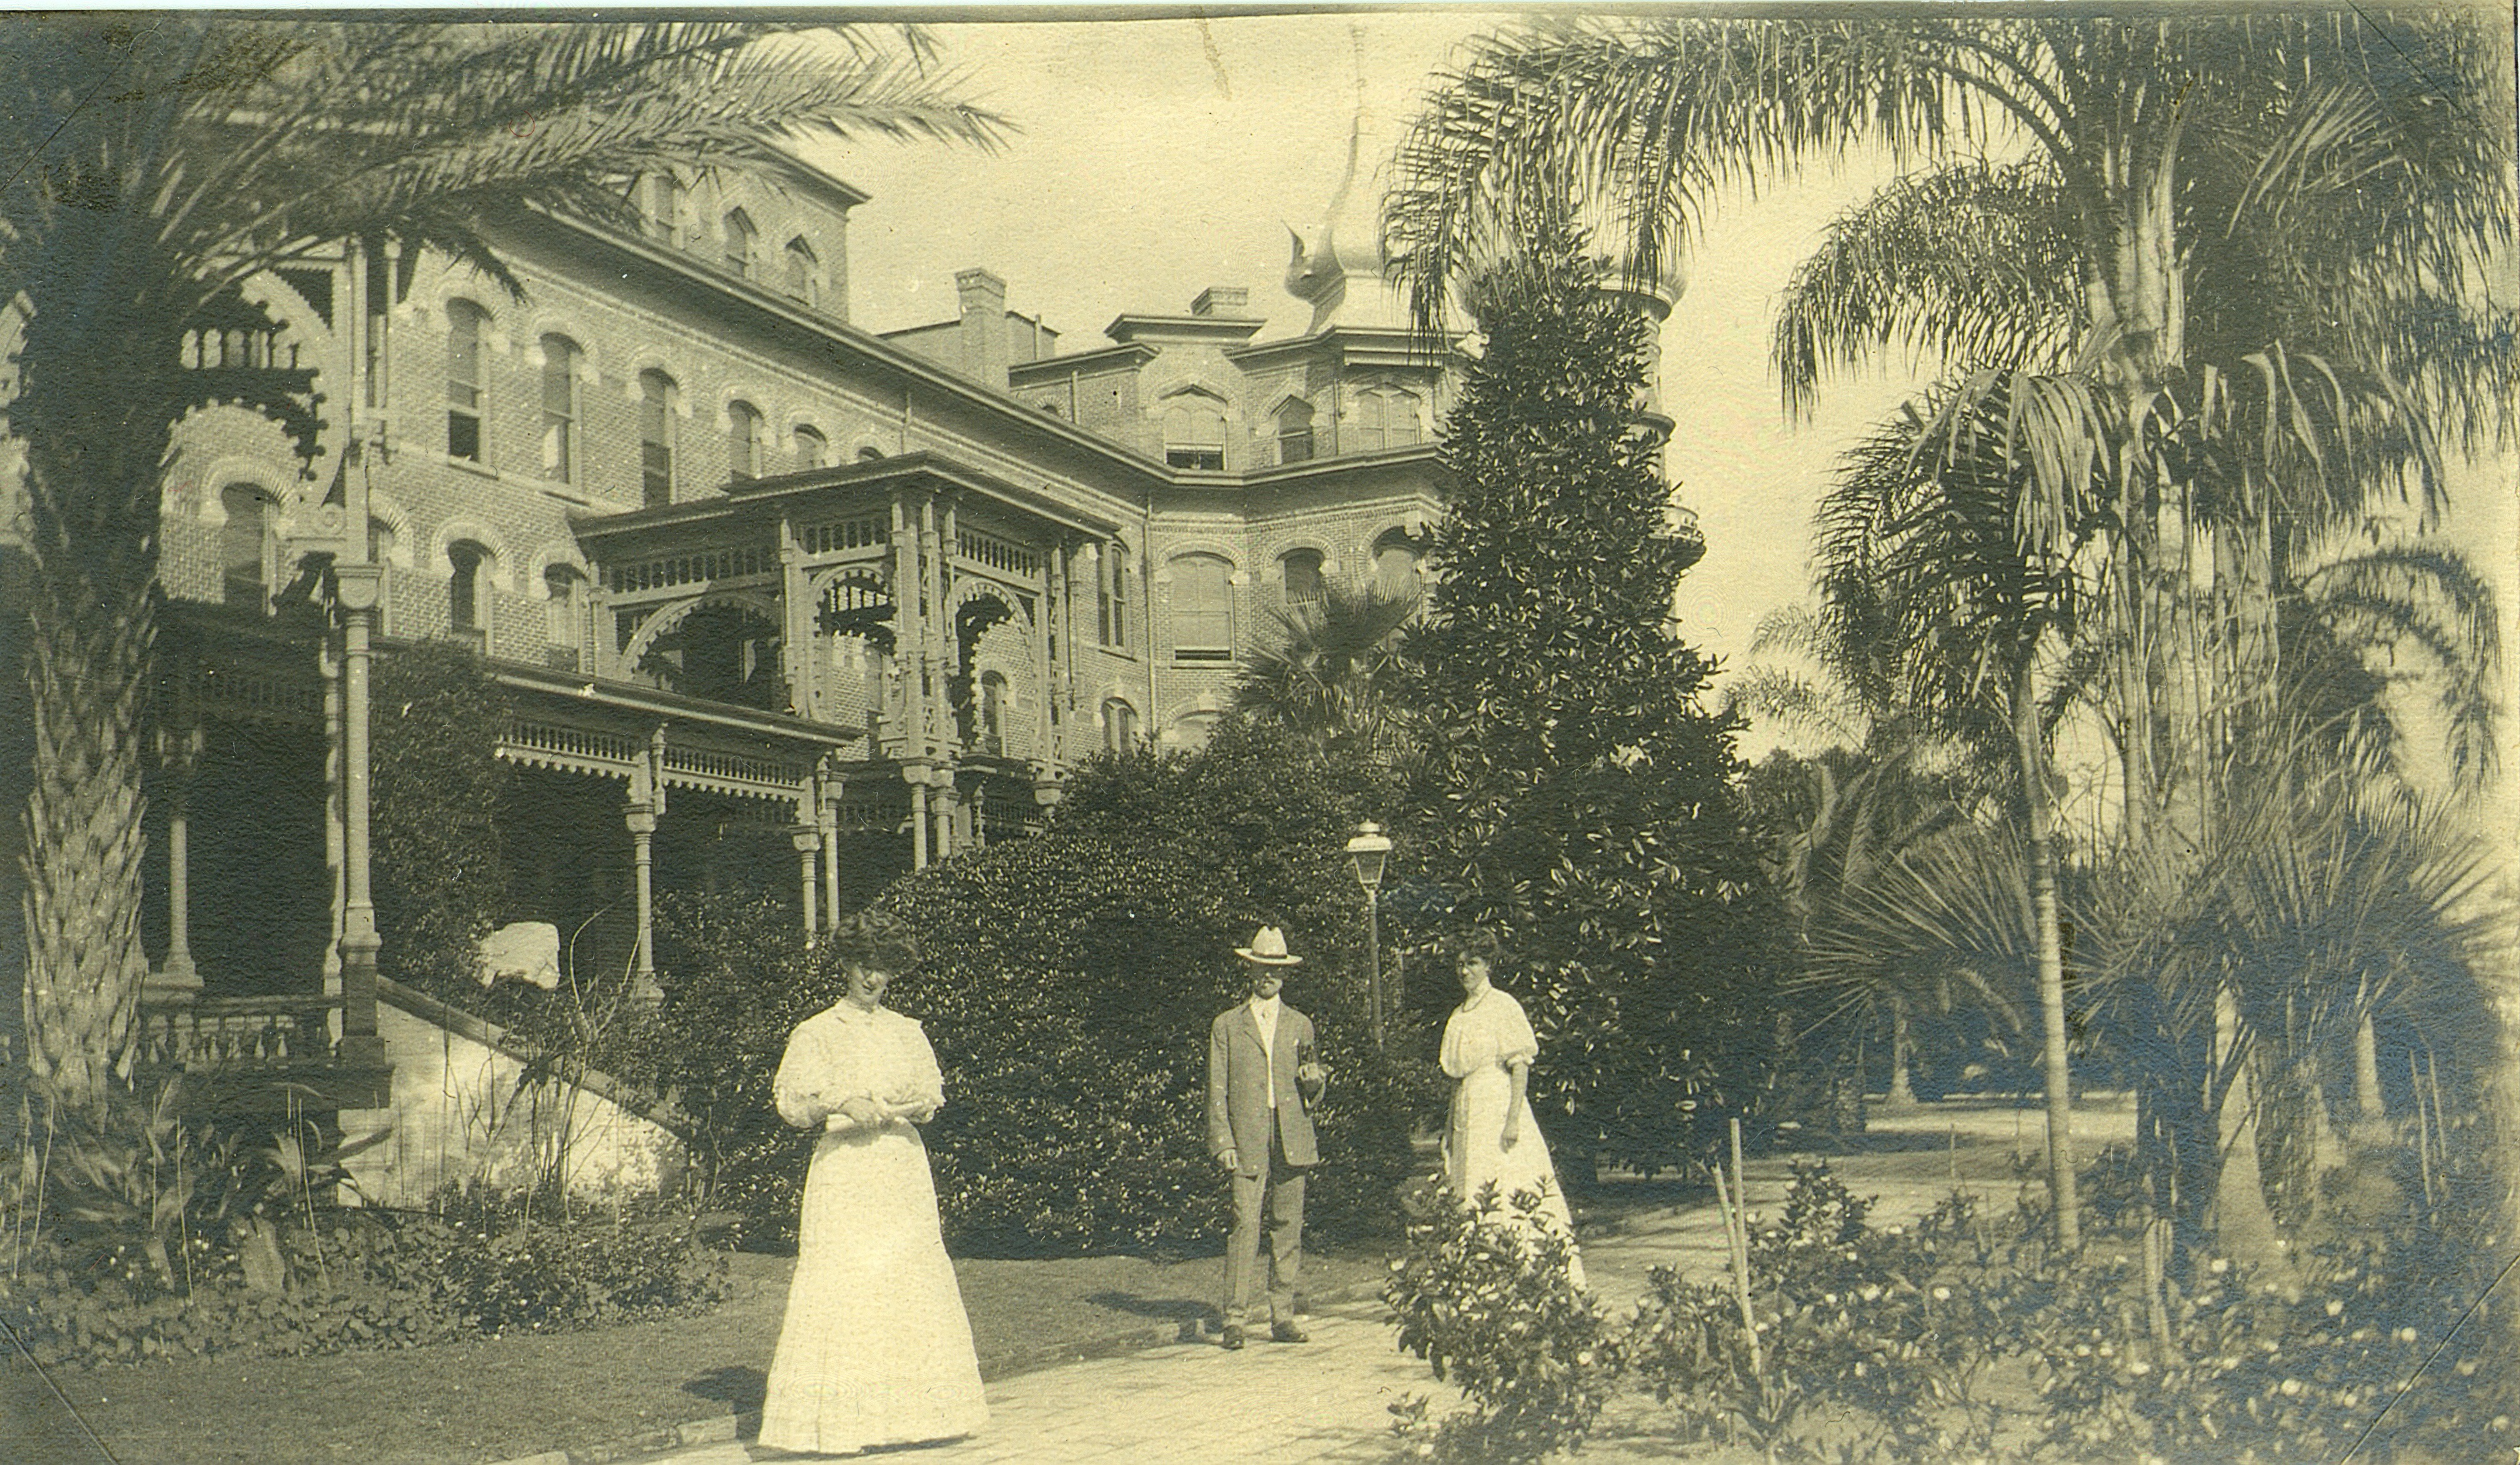 2 women and 1 man in old-fashioned clothing standing in front of hotel, surrounded by lush plants